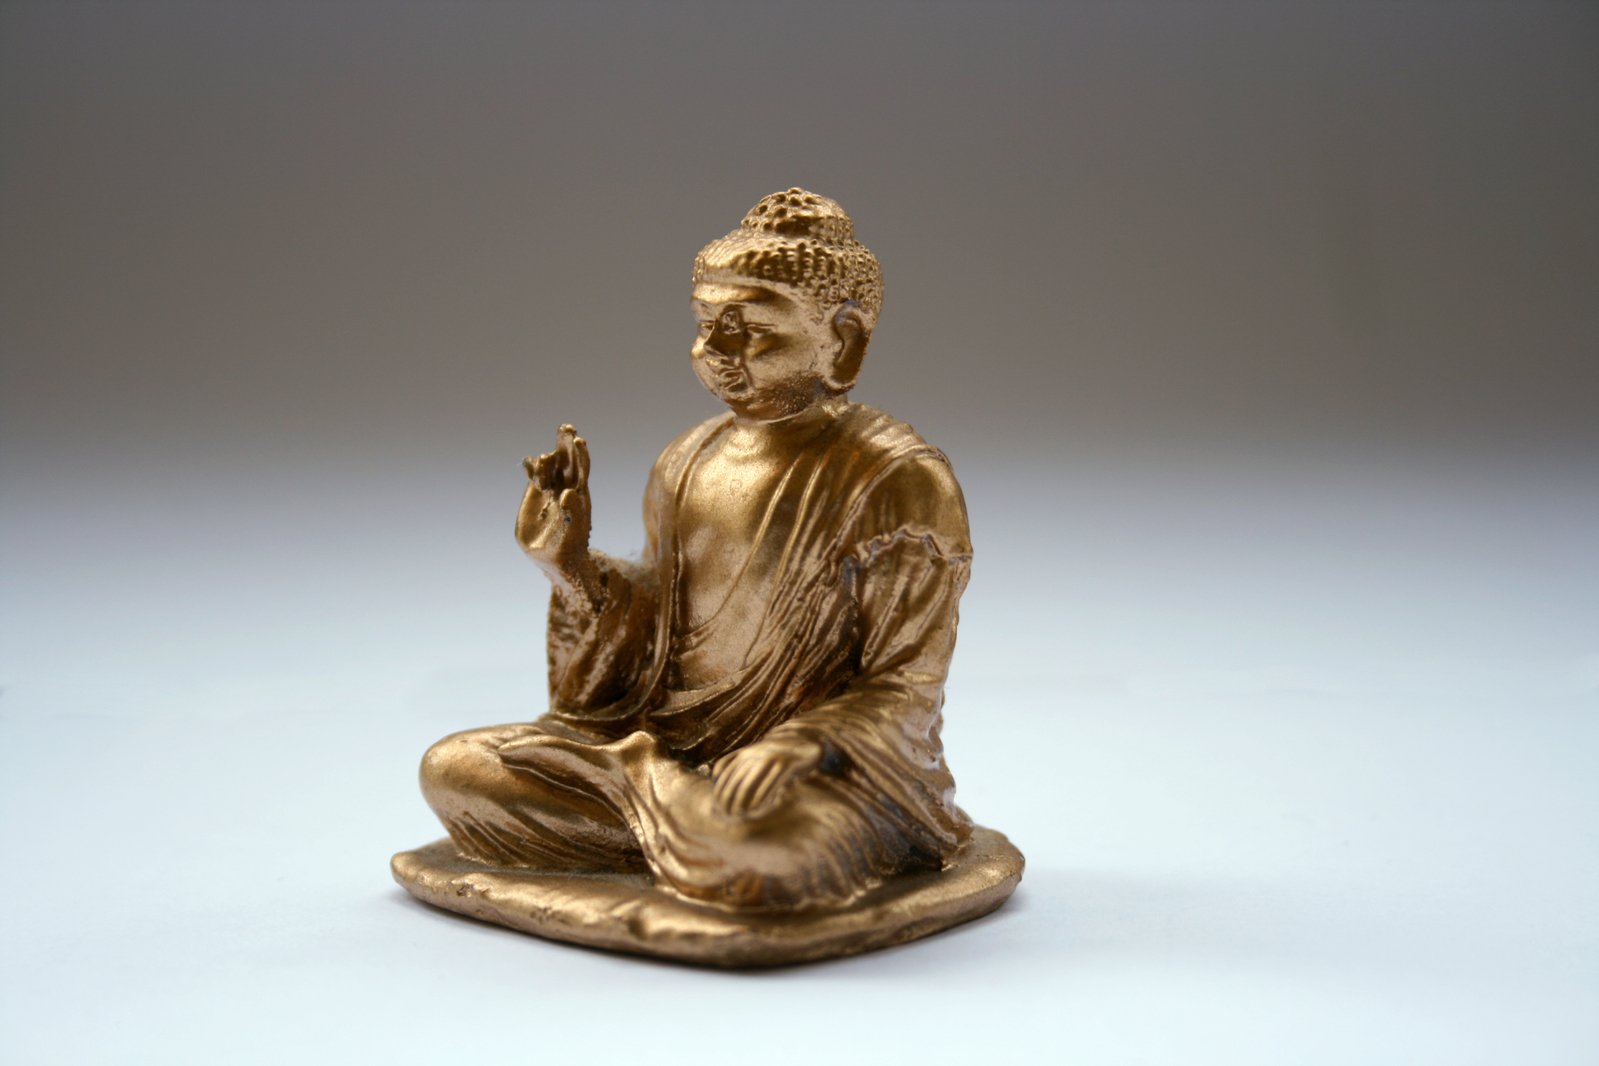 a golden statue that has a small buddha sitting on it